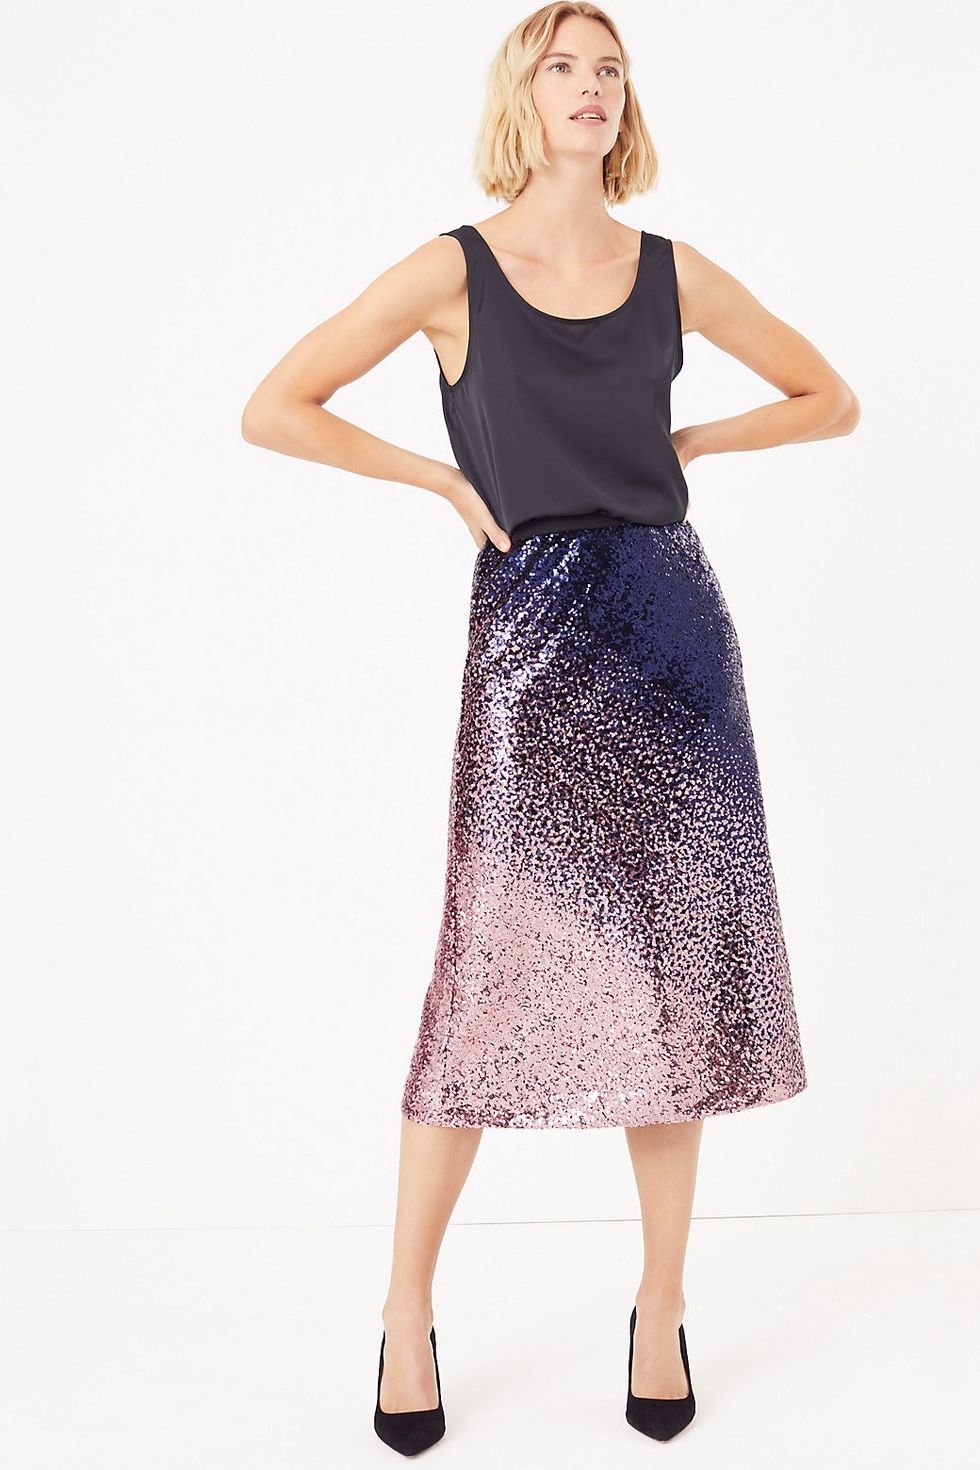 This Marks & Spencer skirt is a must-have for party season